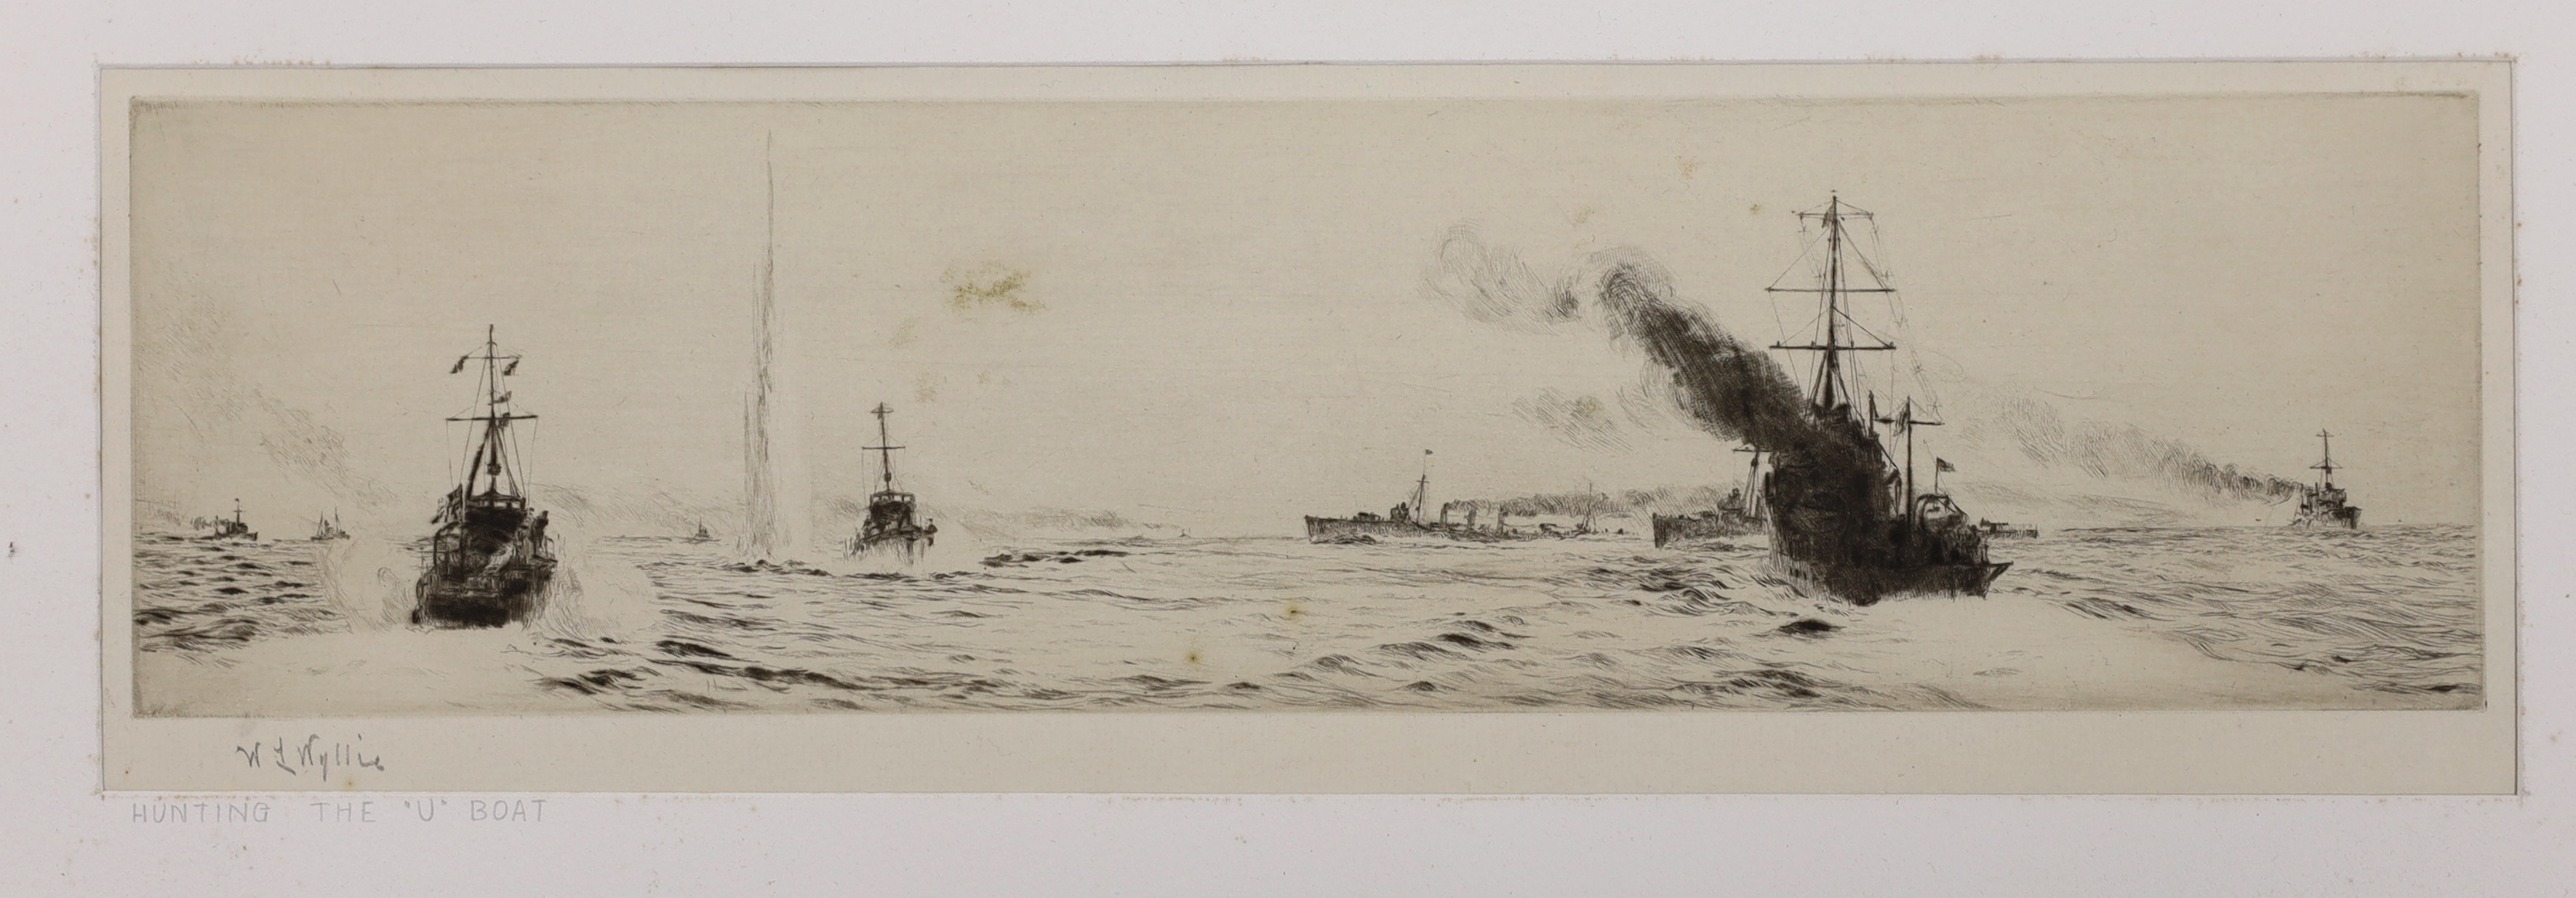 William Lionel Wyllie (1851-1931), drypoint etching, 'Hunting the U-boat', signed in pencil, 8.5 x 33cm, unframed